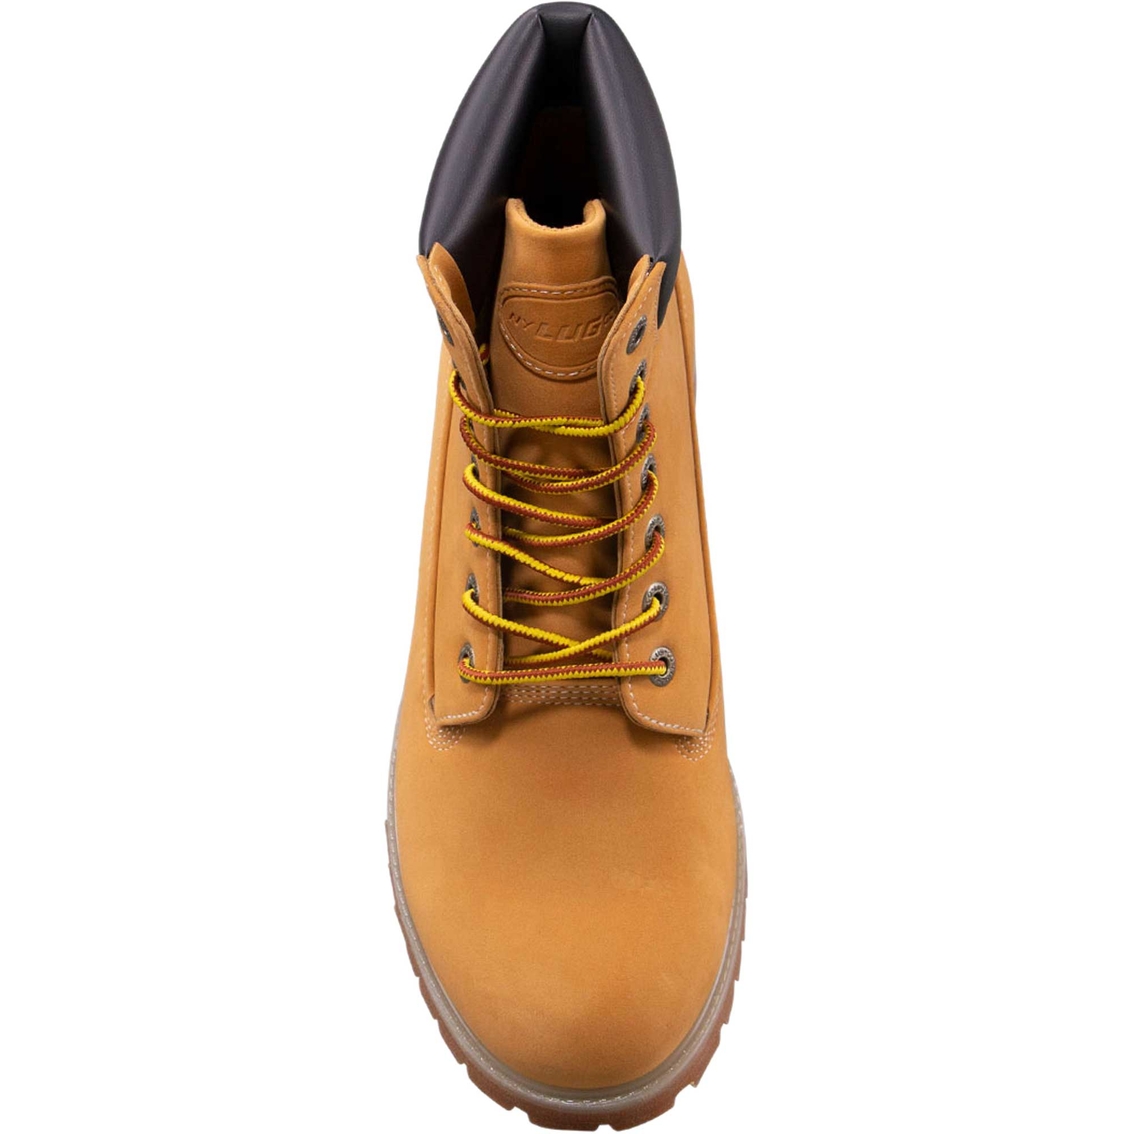 Lugz Men's Convoy 6 in. Boots - Image 5 of 6